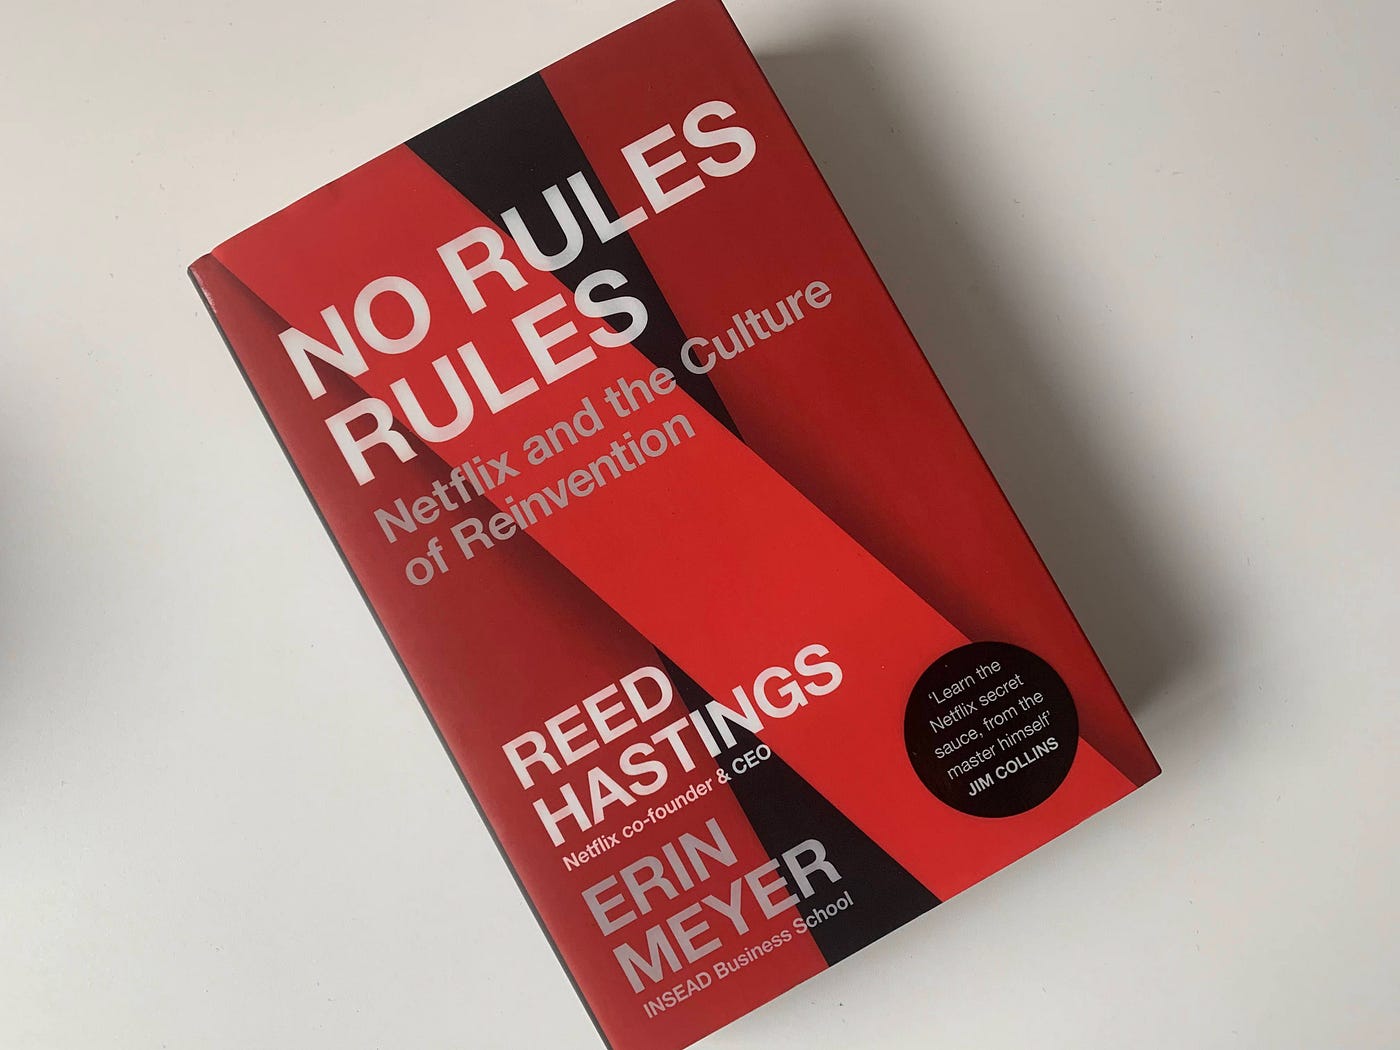 No Rules Rules: Netflix and the Culture of by Hastings, Reed